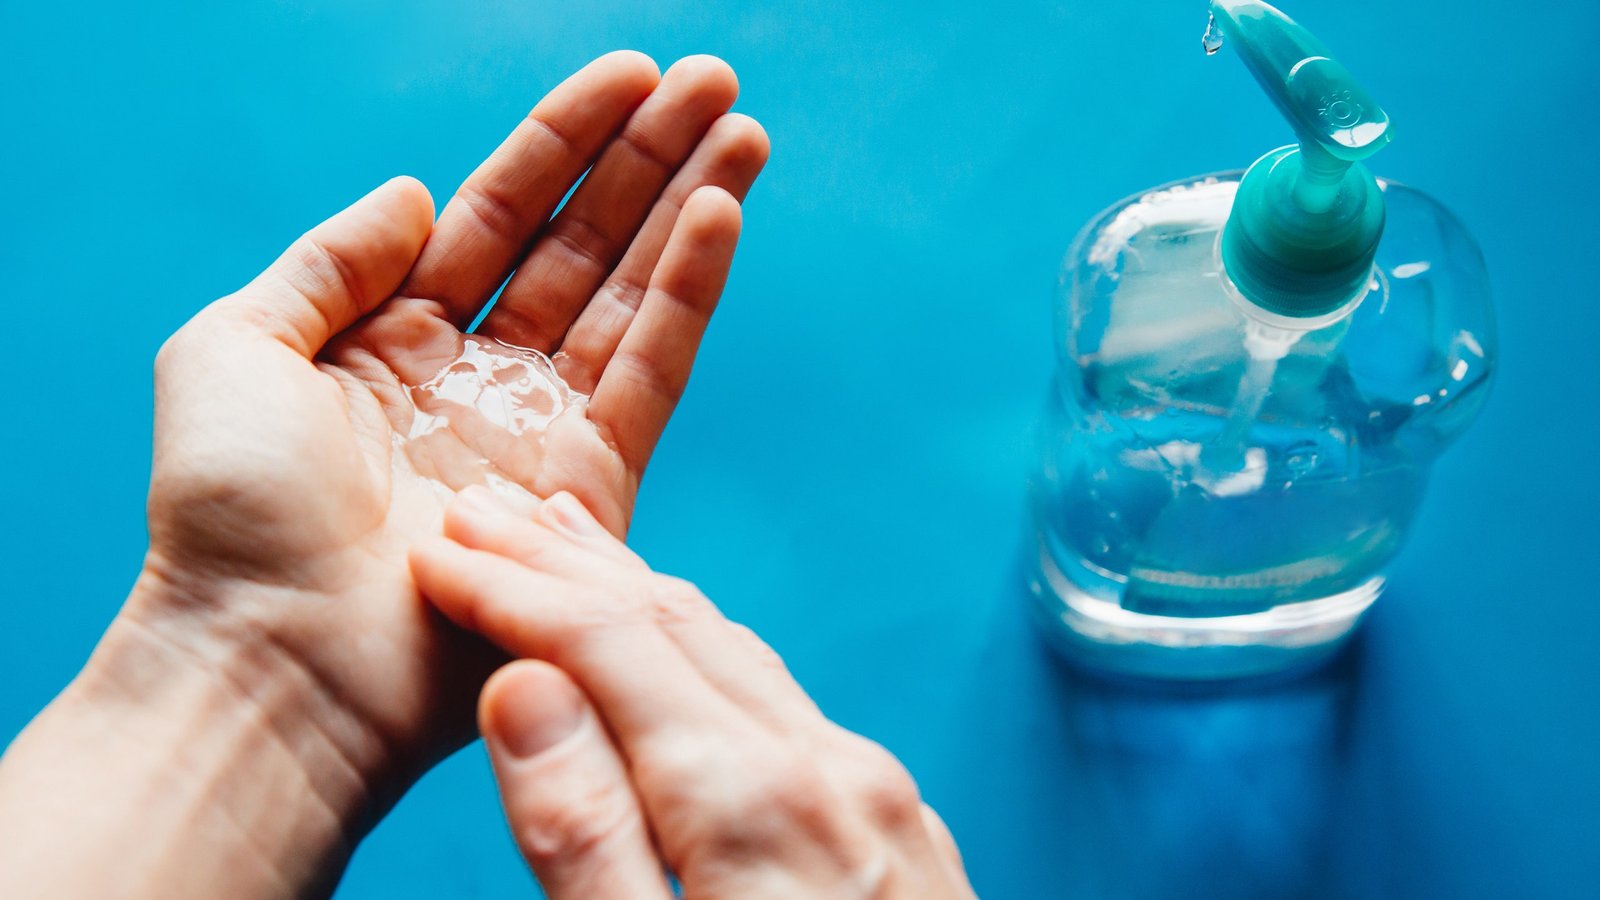 Say Goodbye To Panic Buying – Hand Sanitizers Are In Surplus